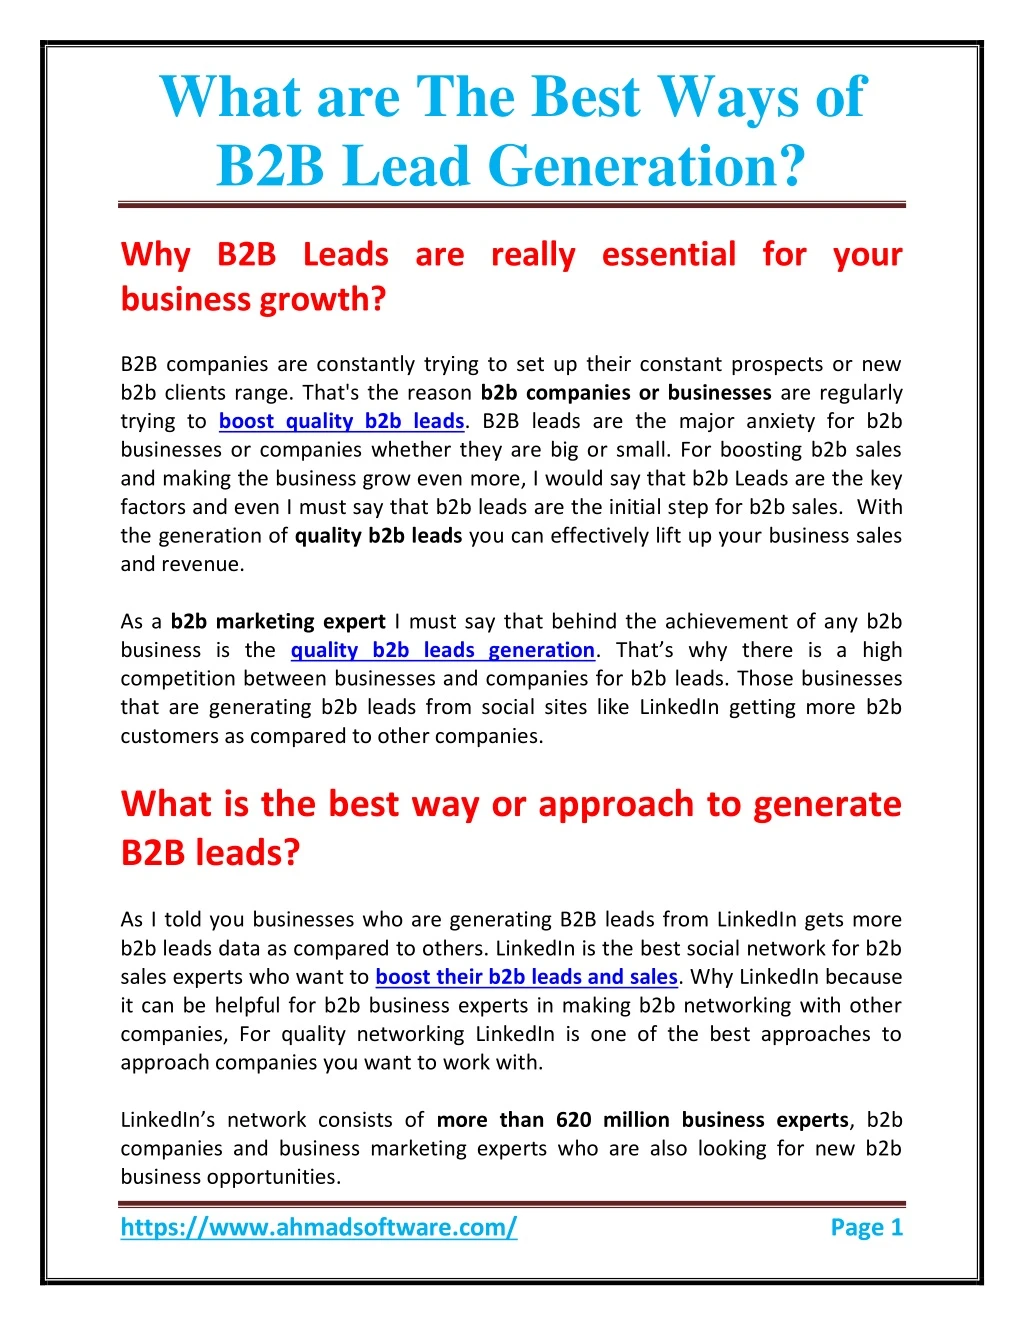 what are the best ways of b2b lead generation